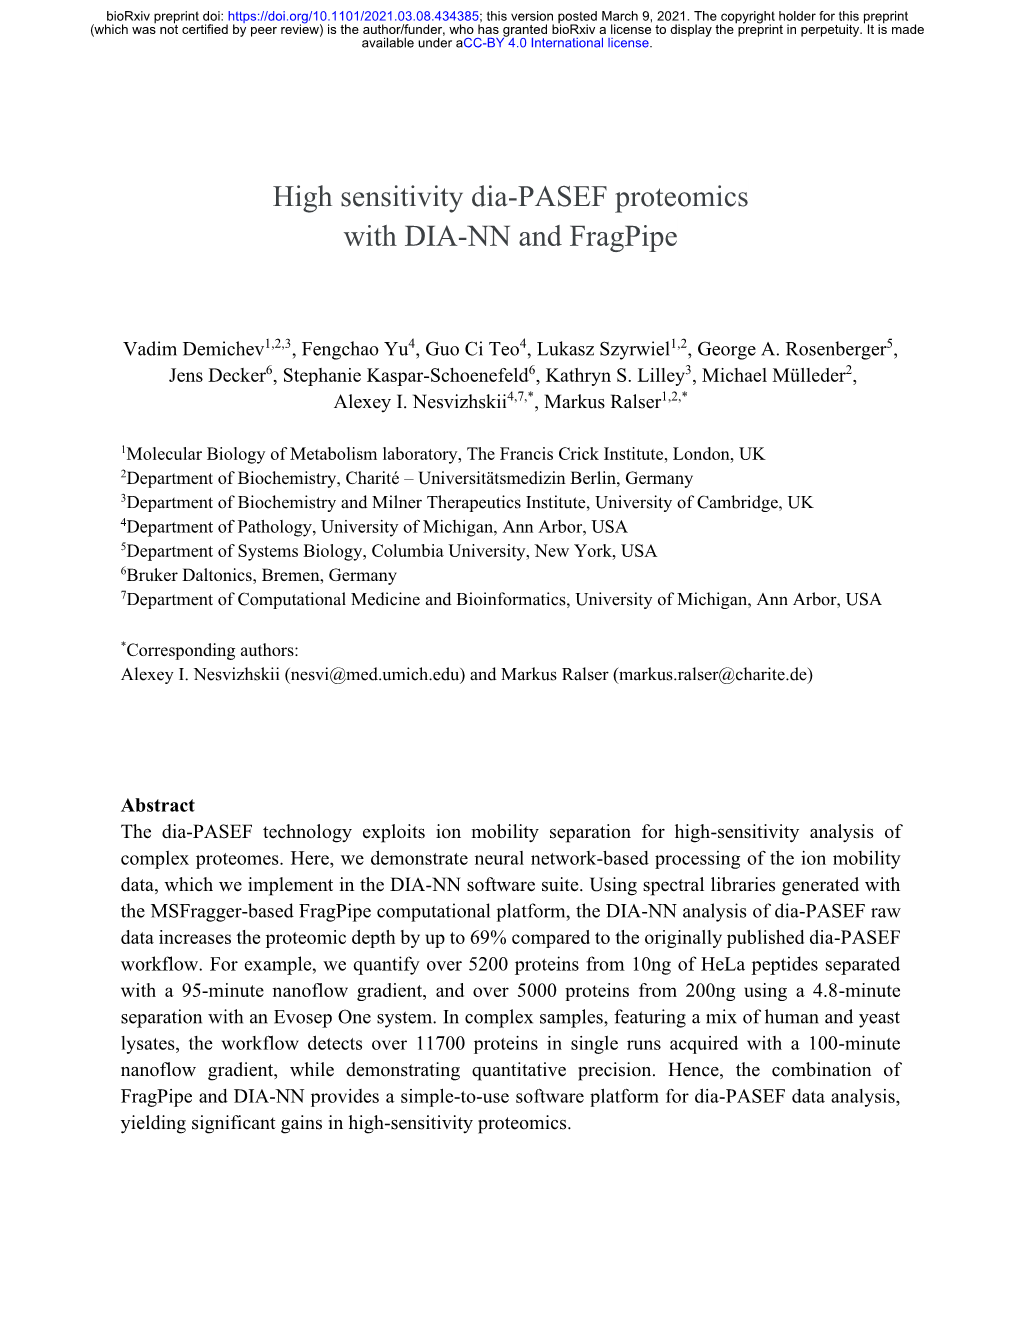 High Sensitivity Dia-PASEF Proteomics with DIA-NN and Fragpipe